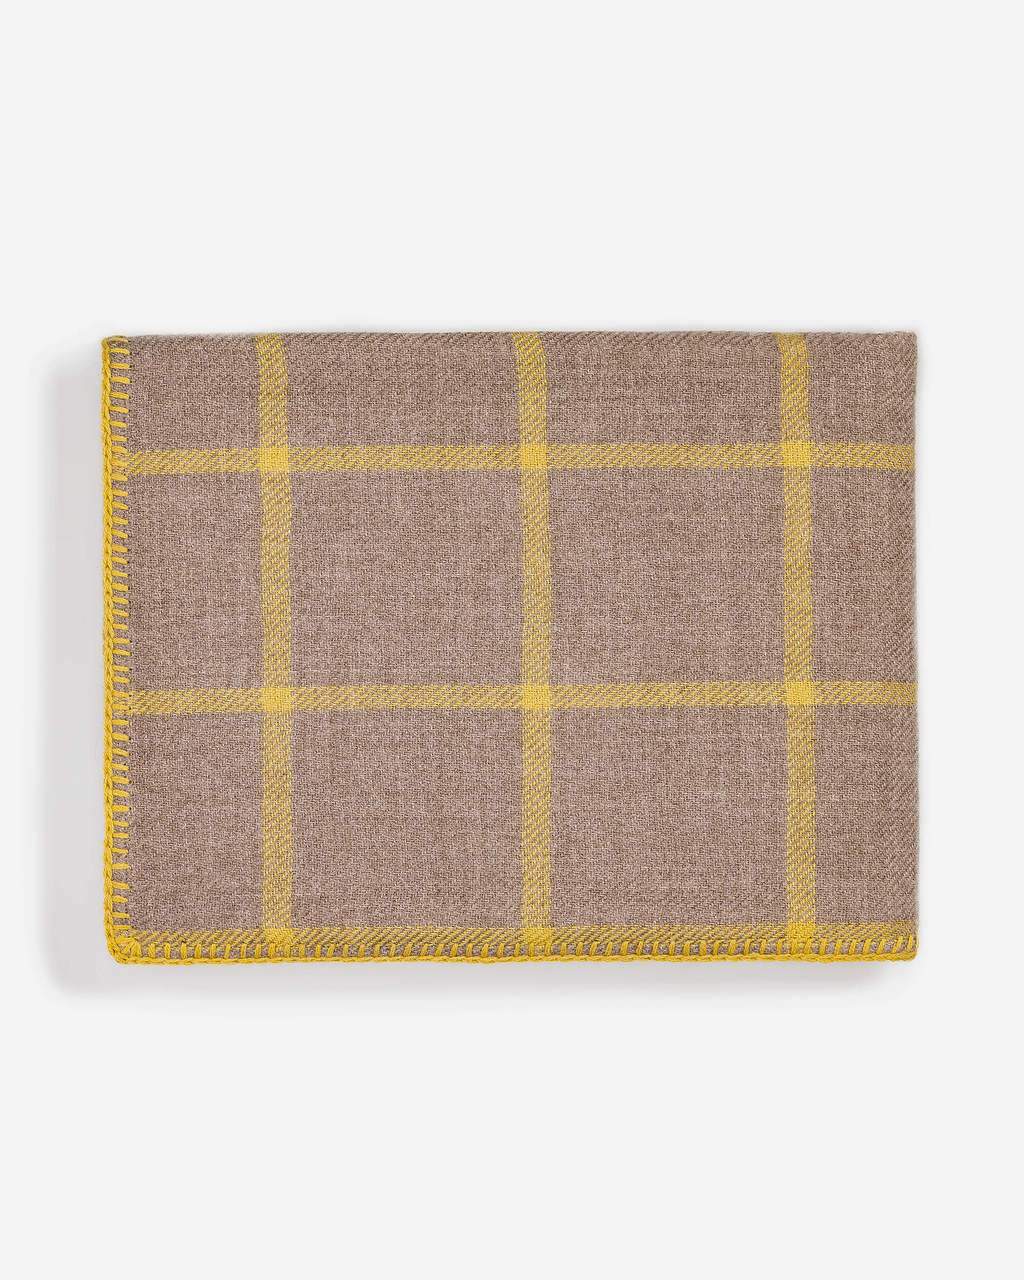 Graydon Alpaca Throw in Taupe and French Yellow by Alicia Adams